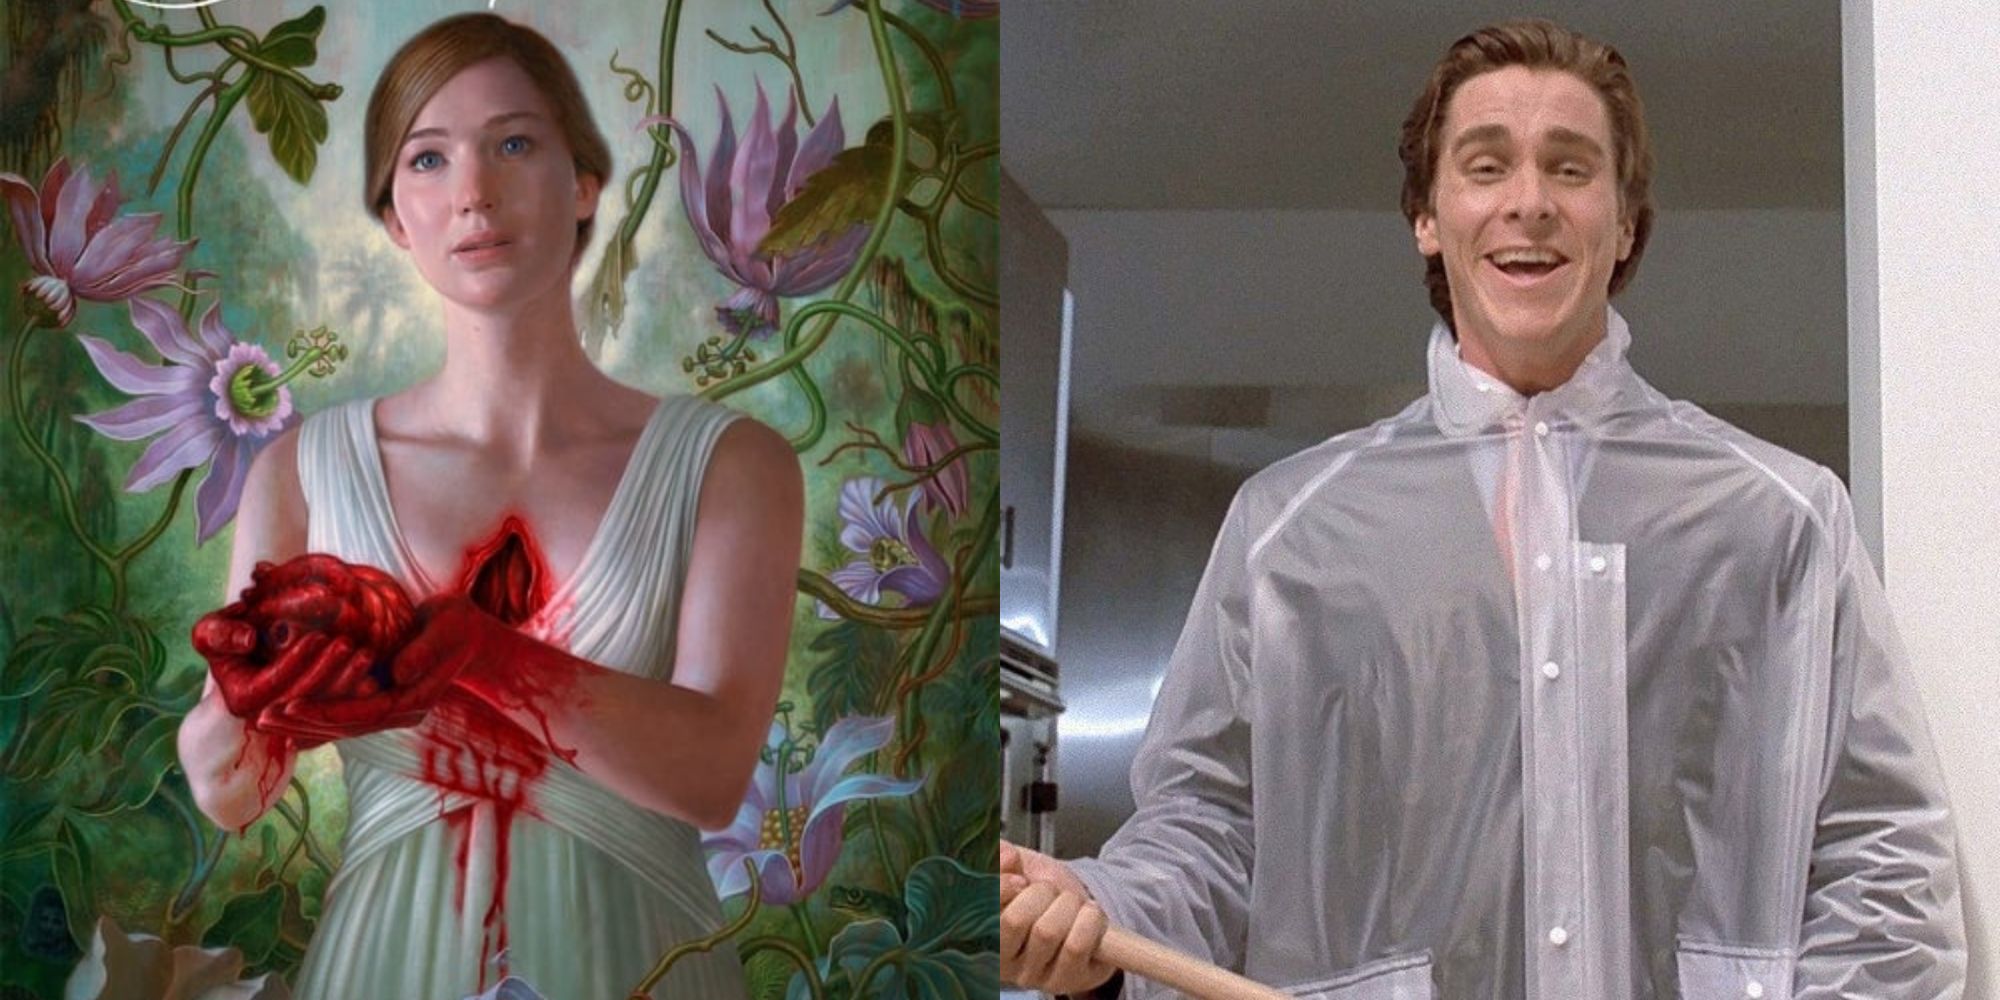 Split image showing Mother in mother! and Patrick Bateman in American Psycho